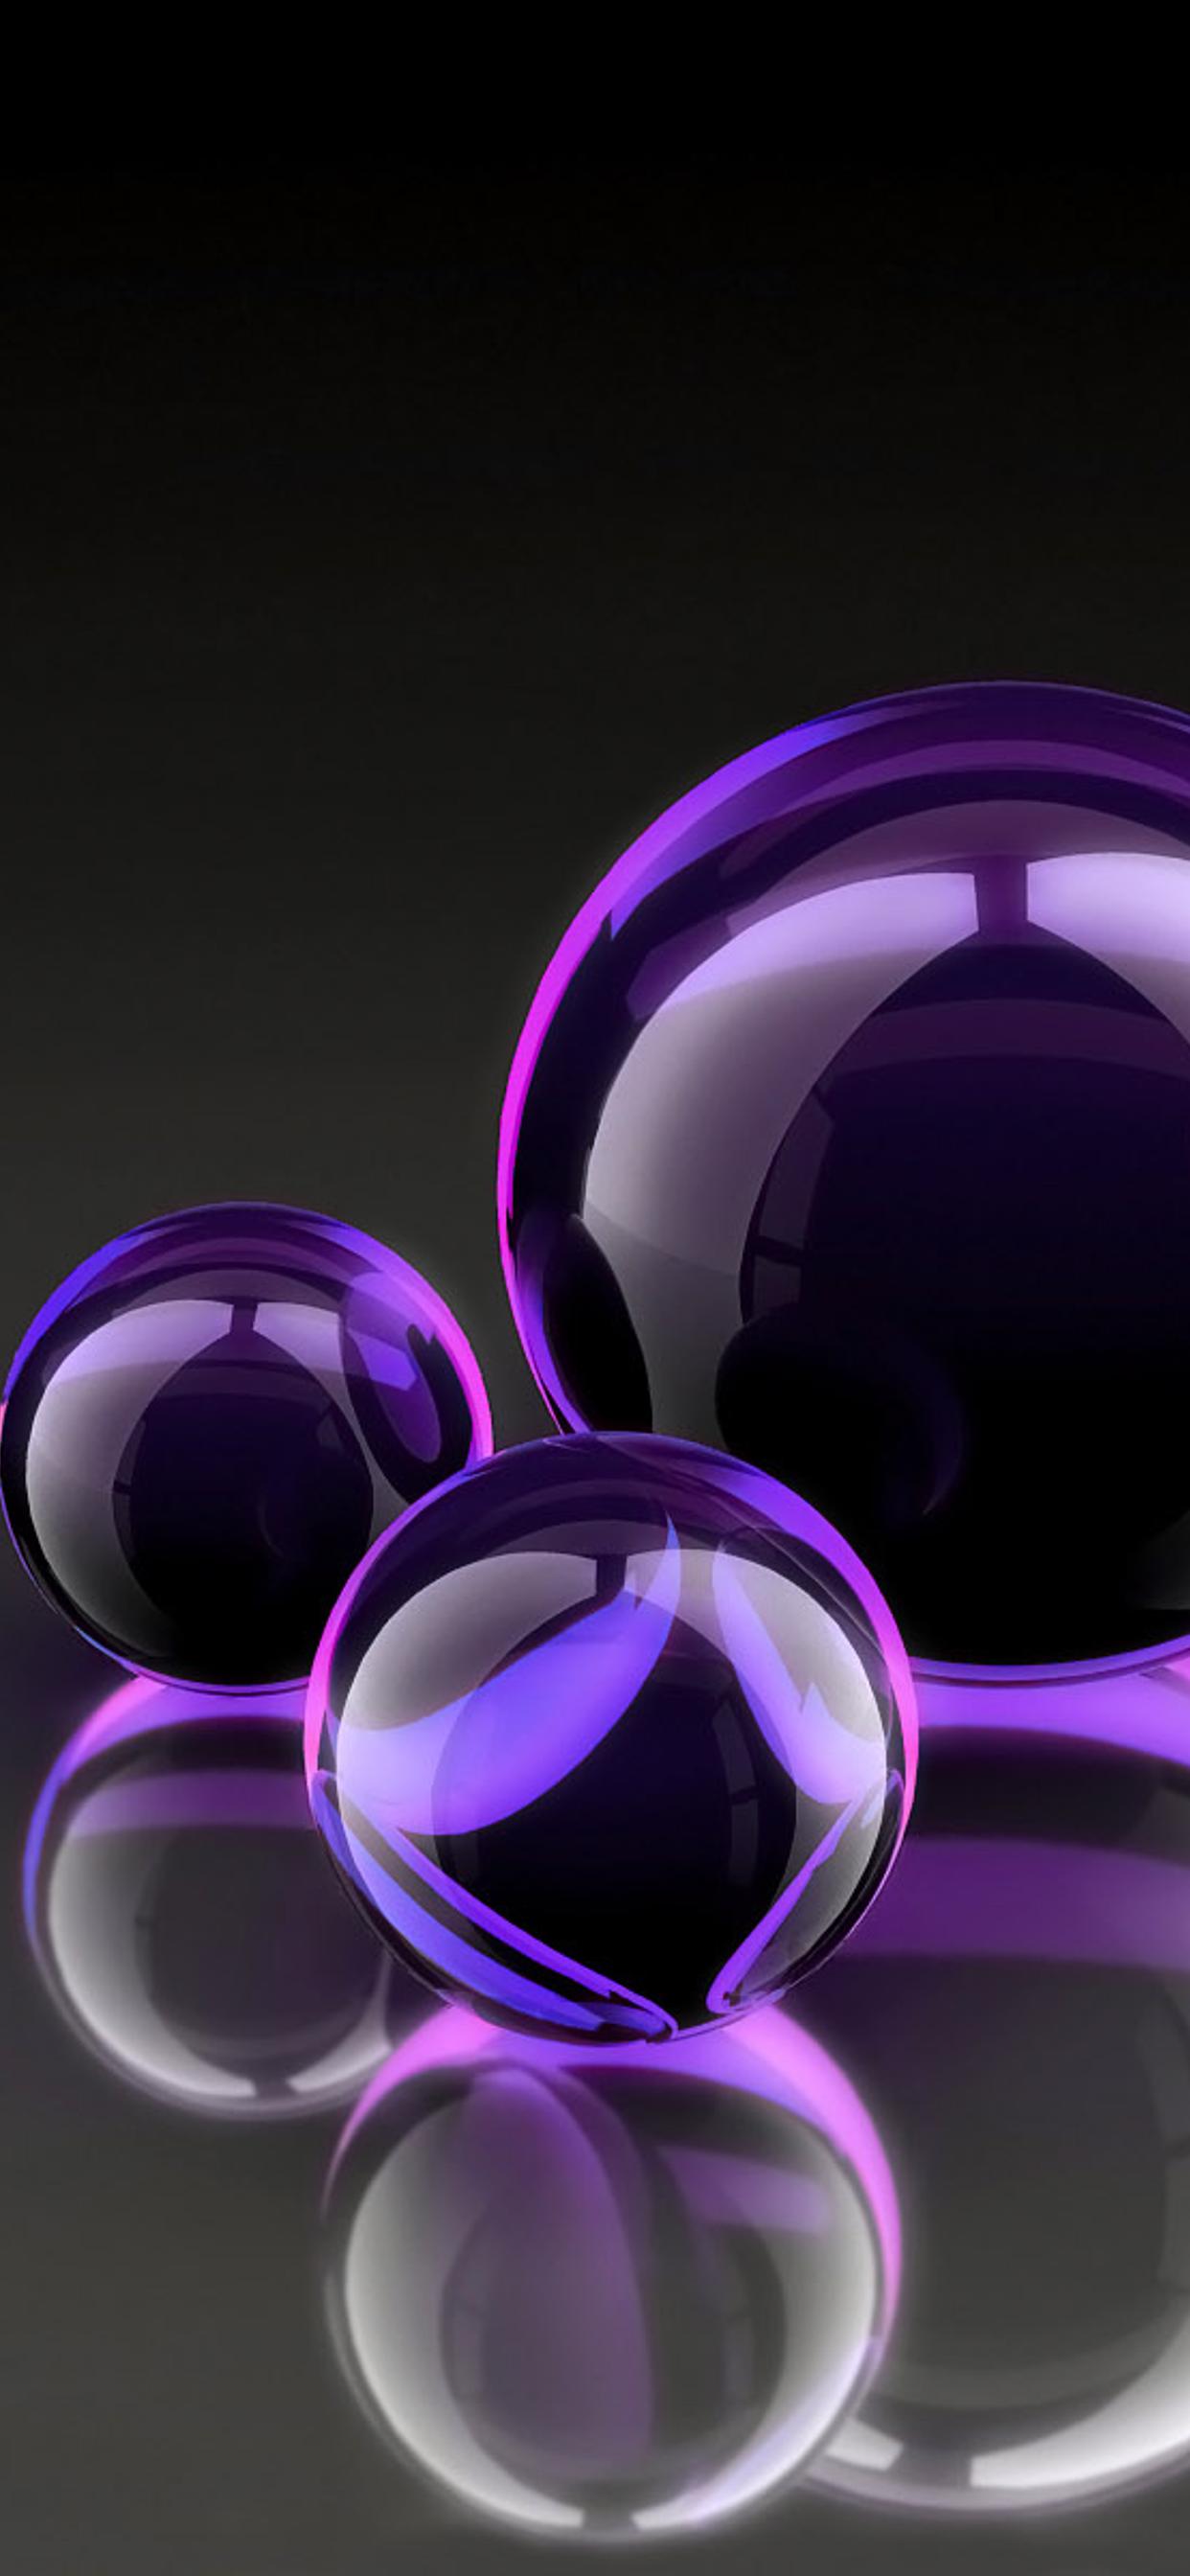 Three black and purple balloons of different sizes 1242x2688